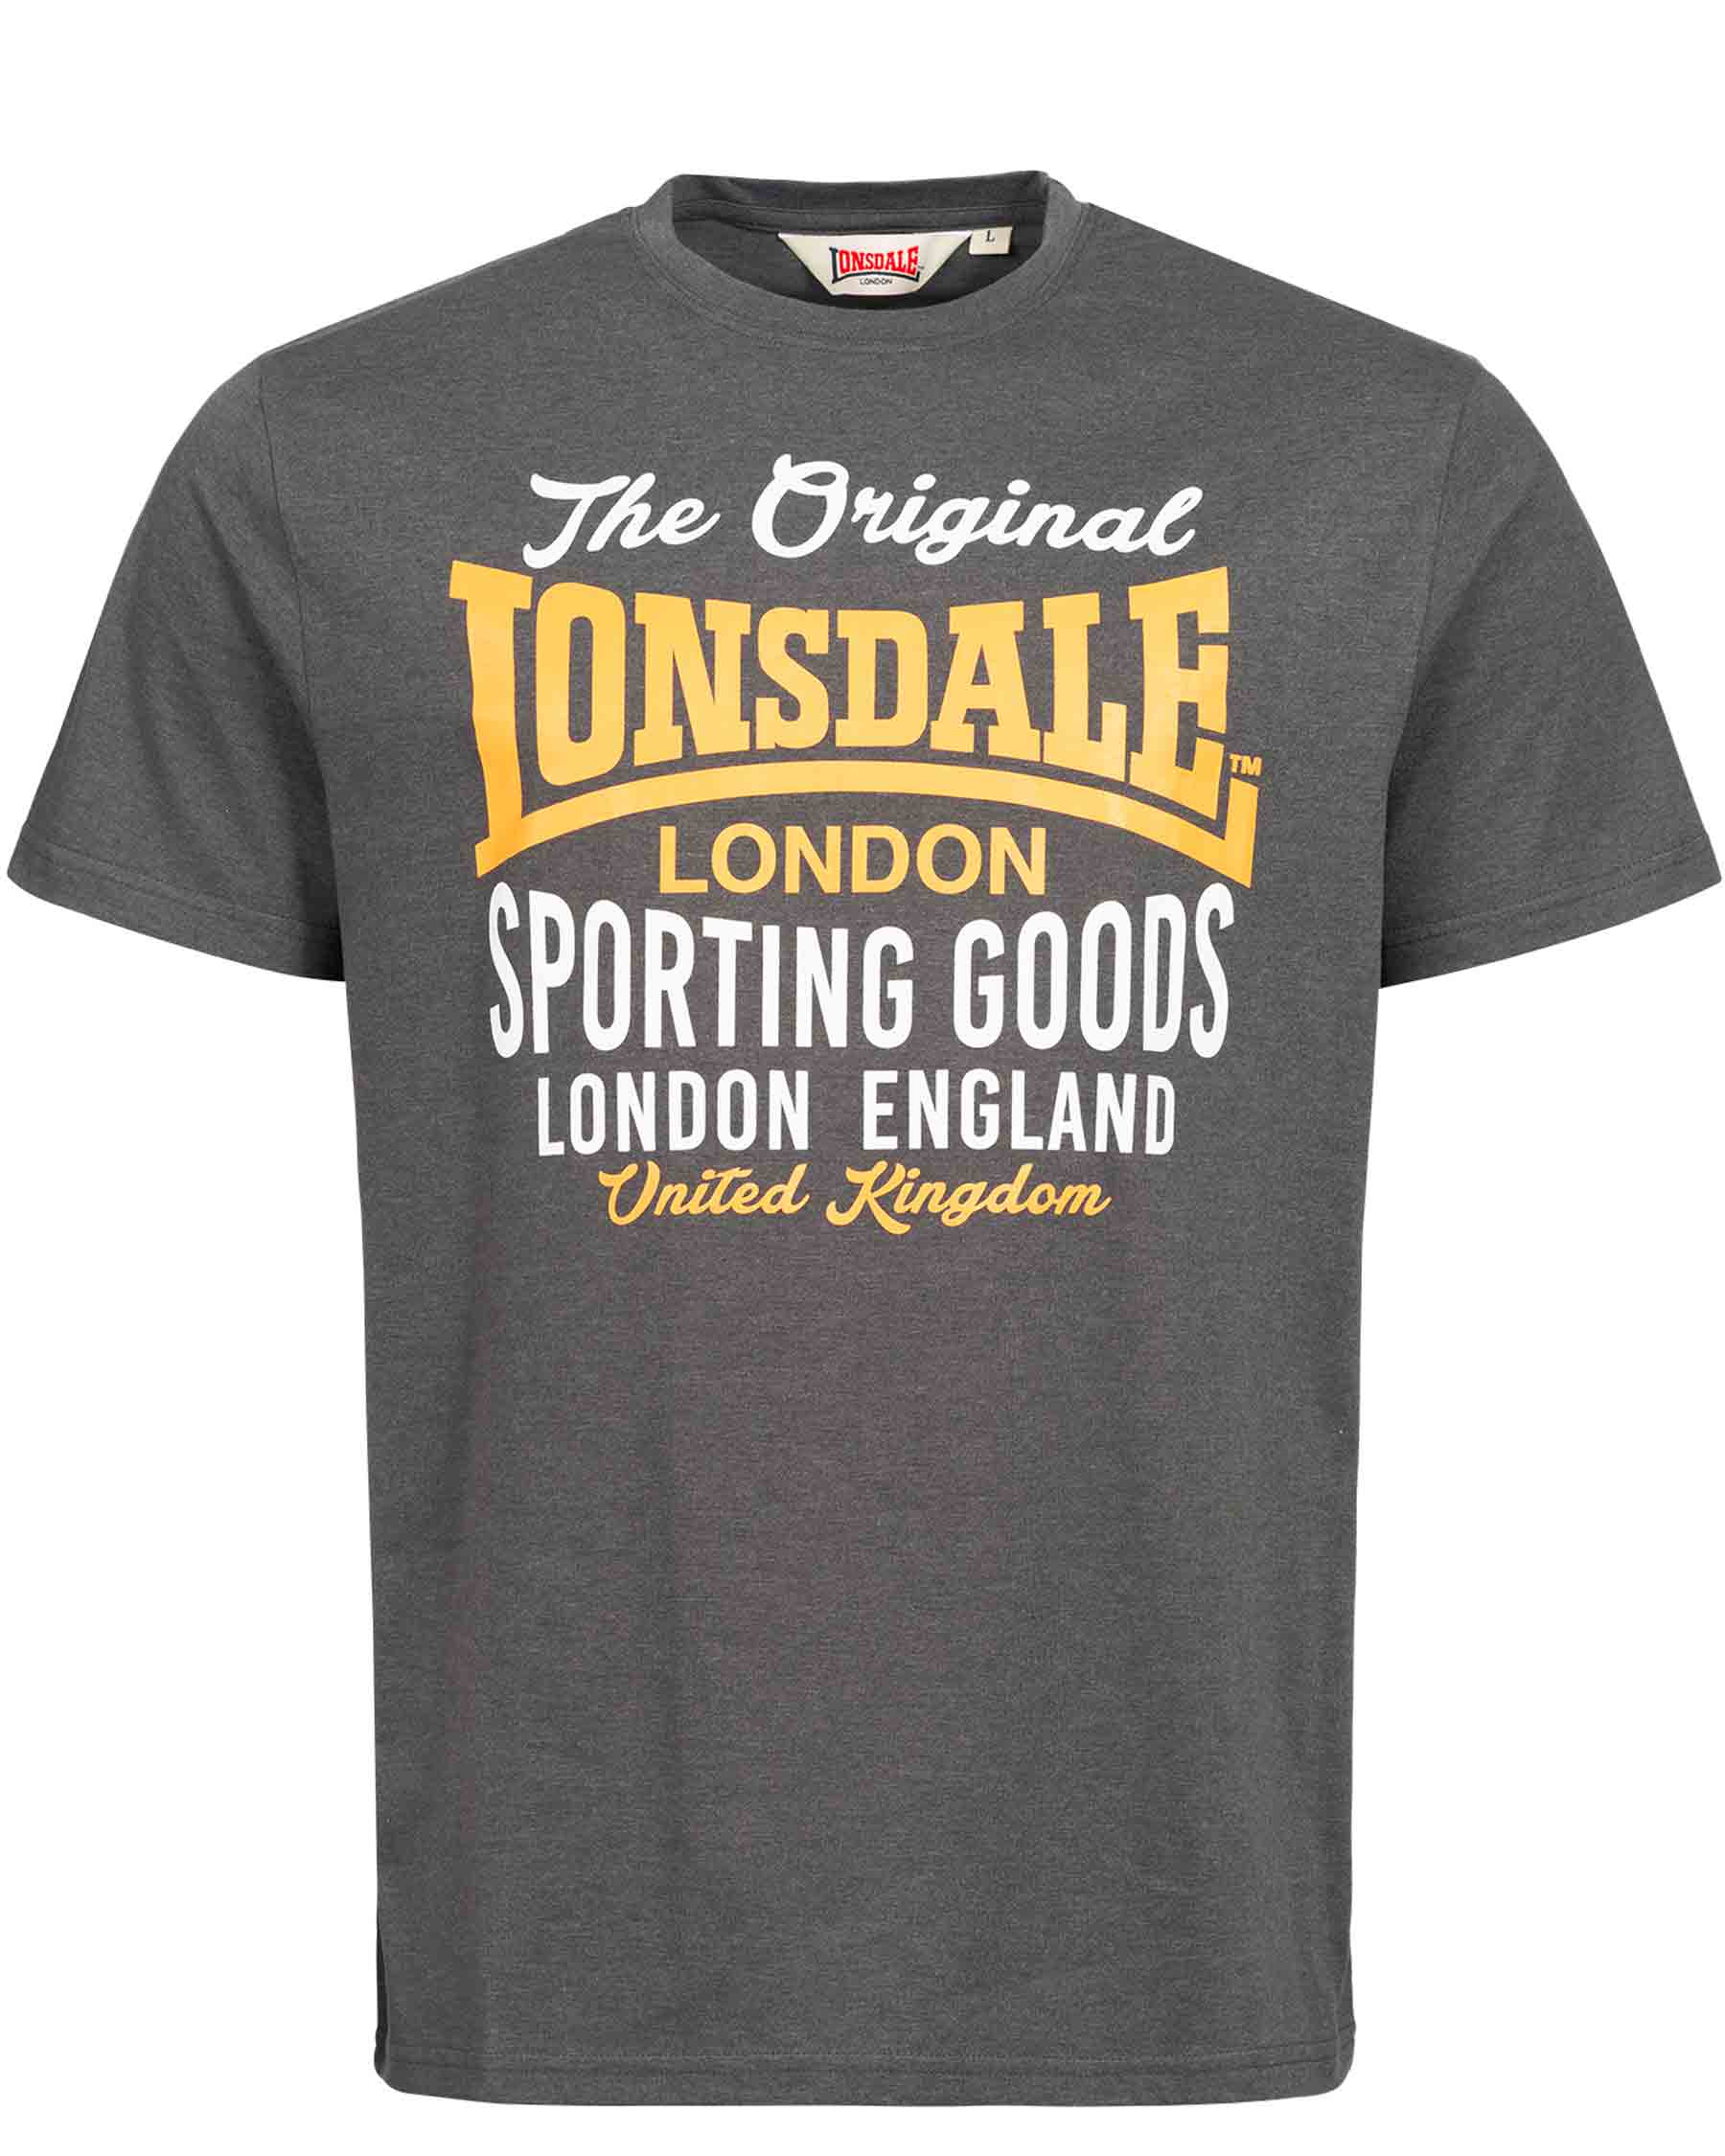 lonsdale t shirt india